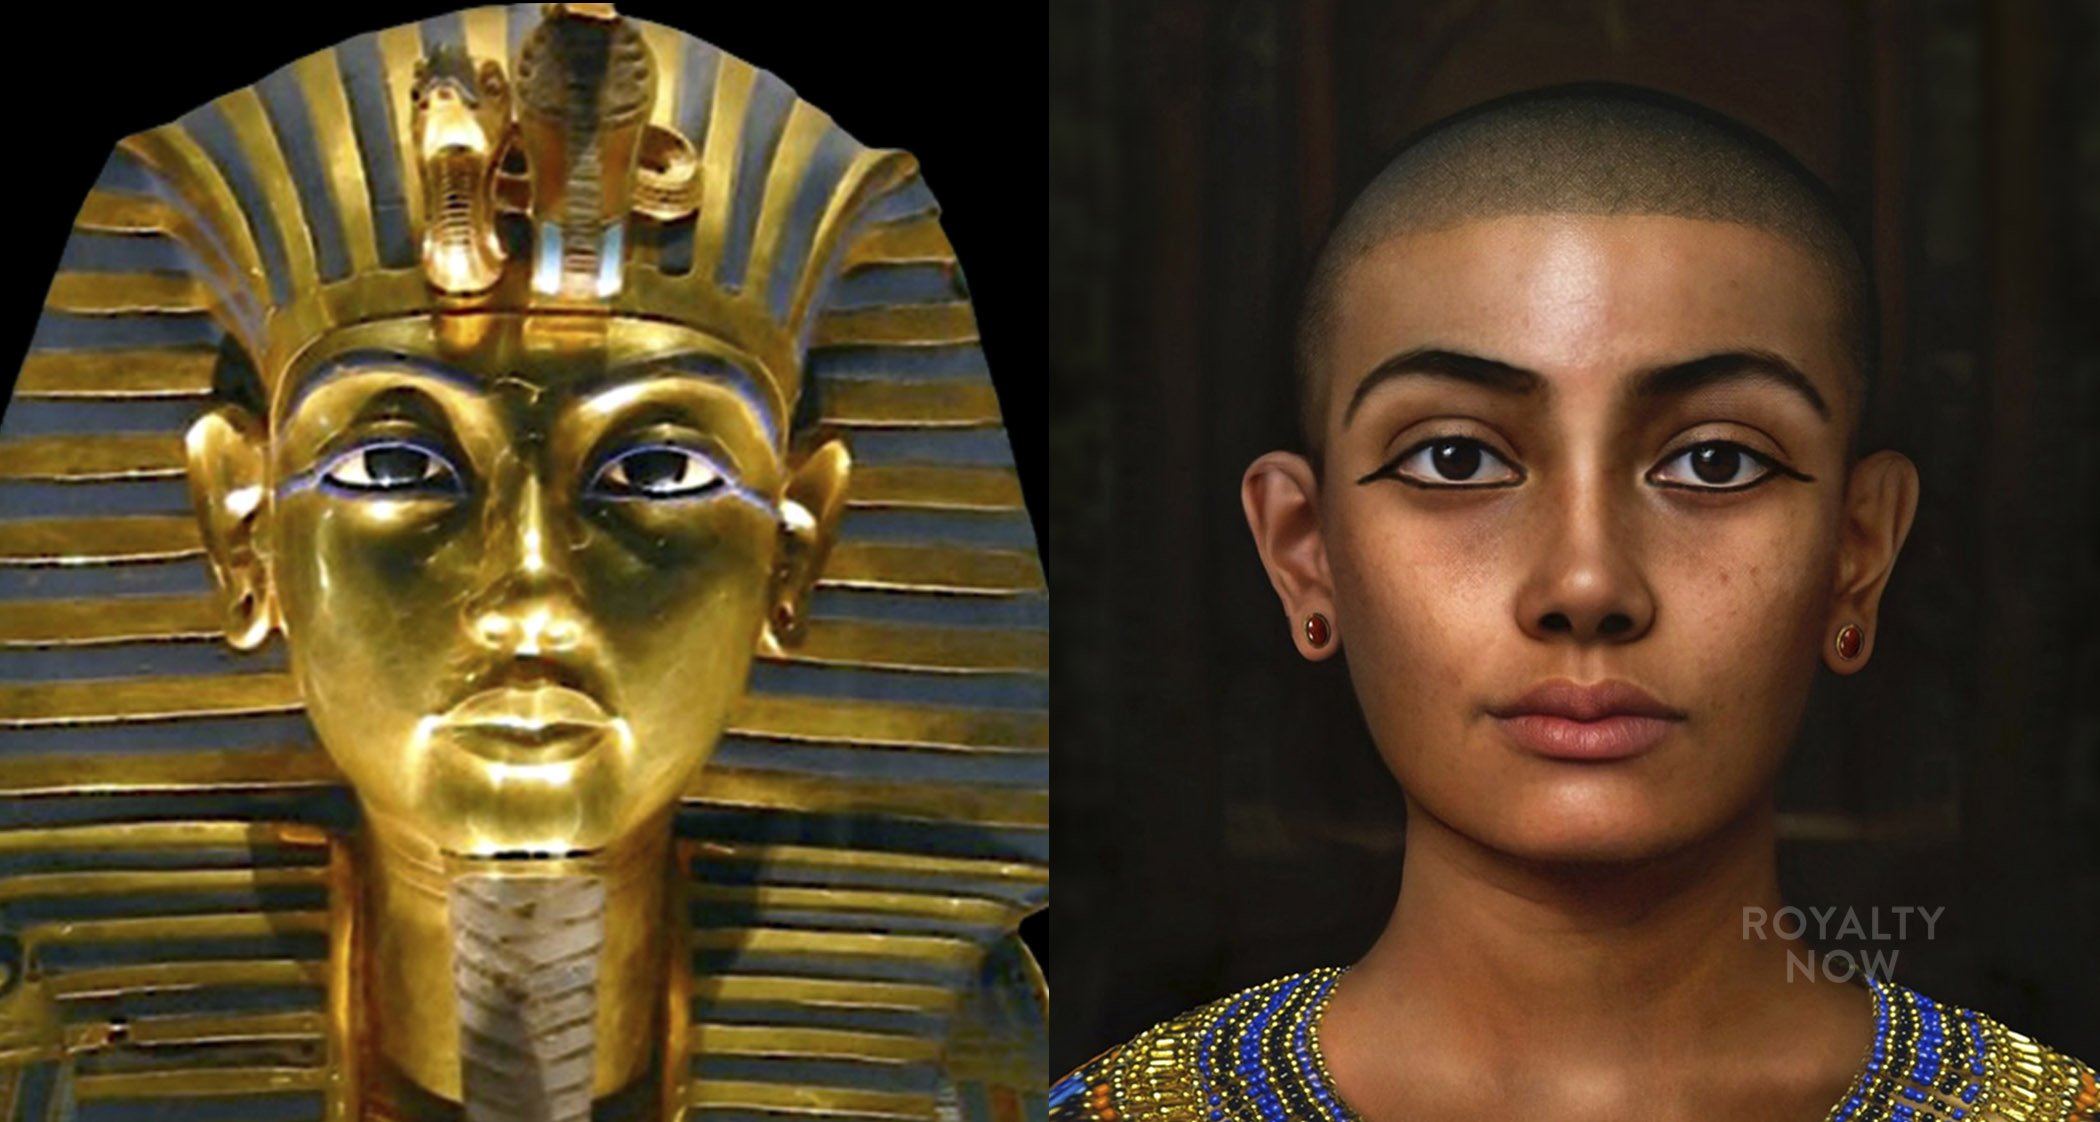 What did King Tut look like? — RoyaltyNow